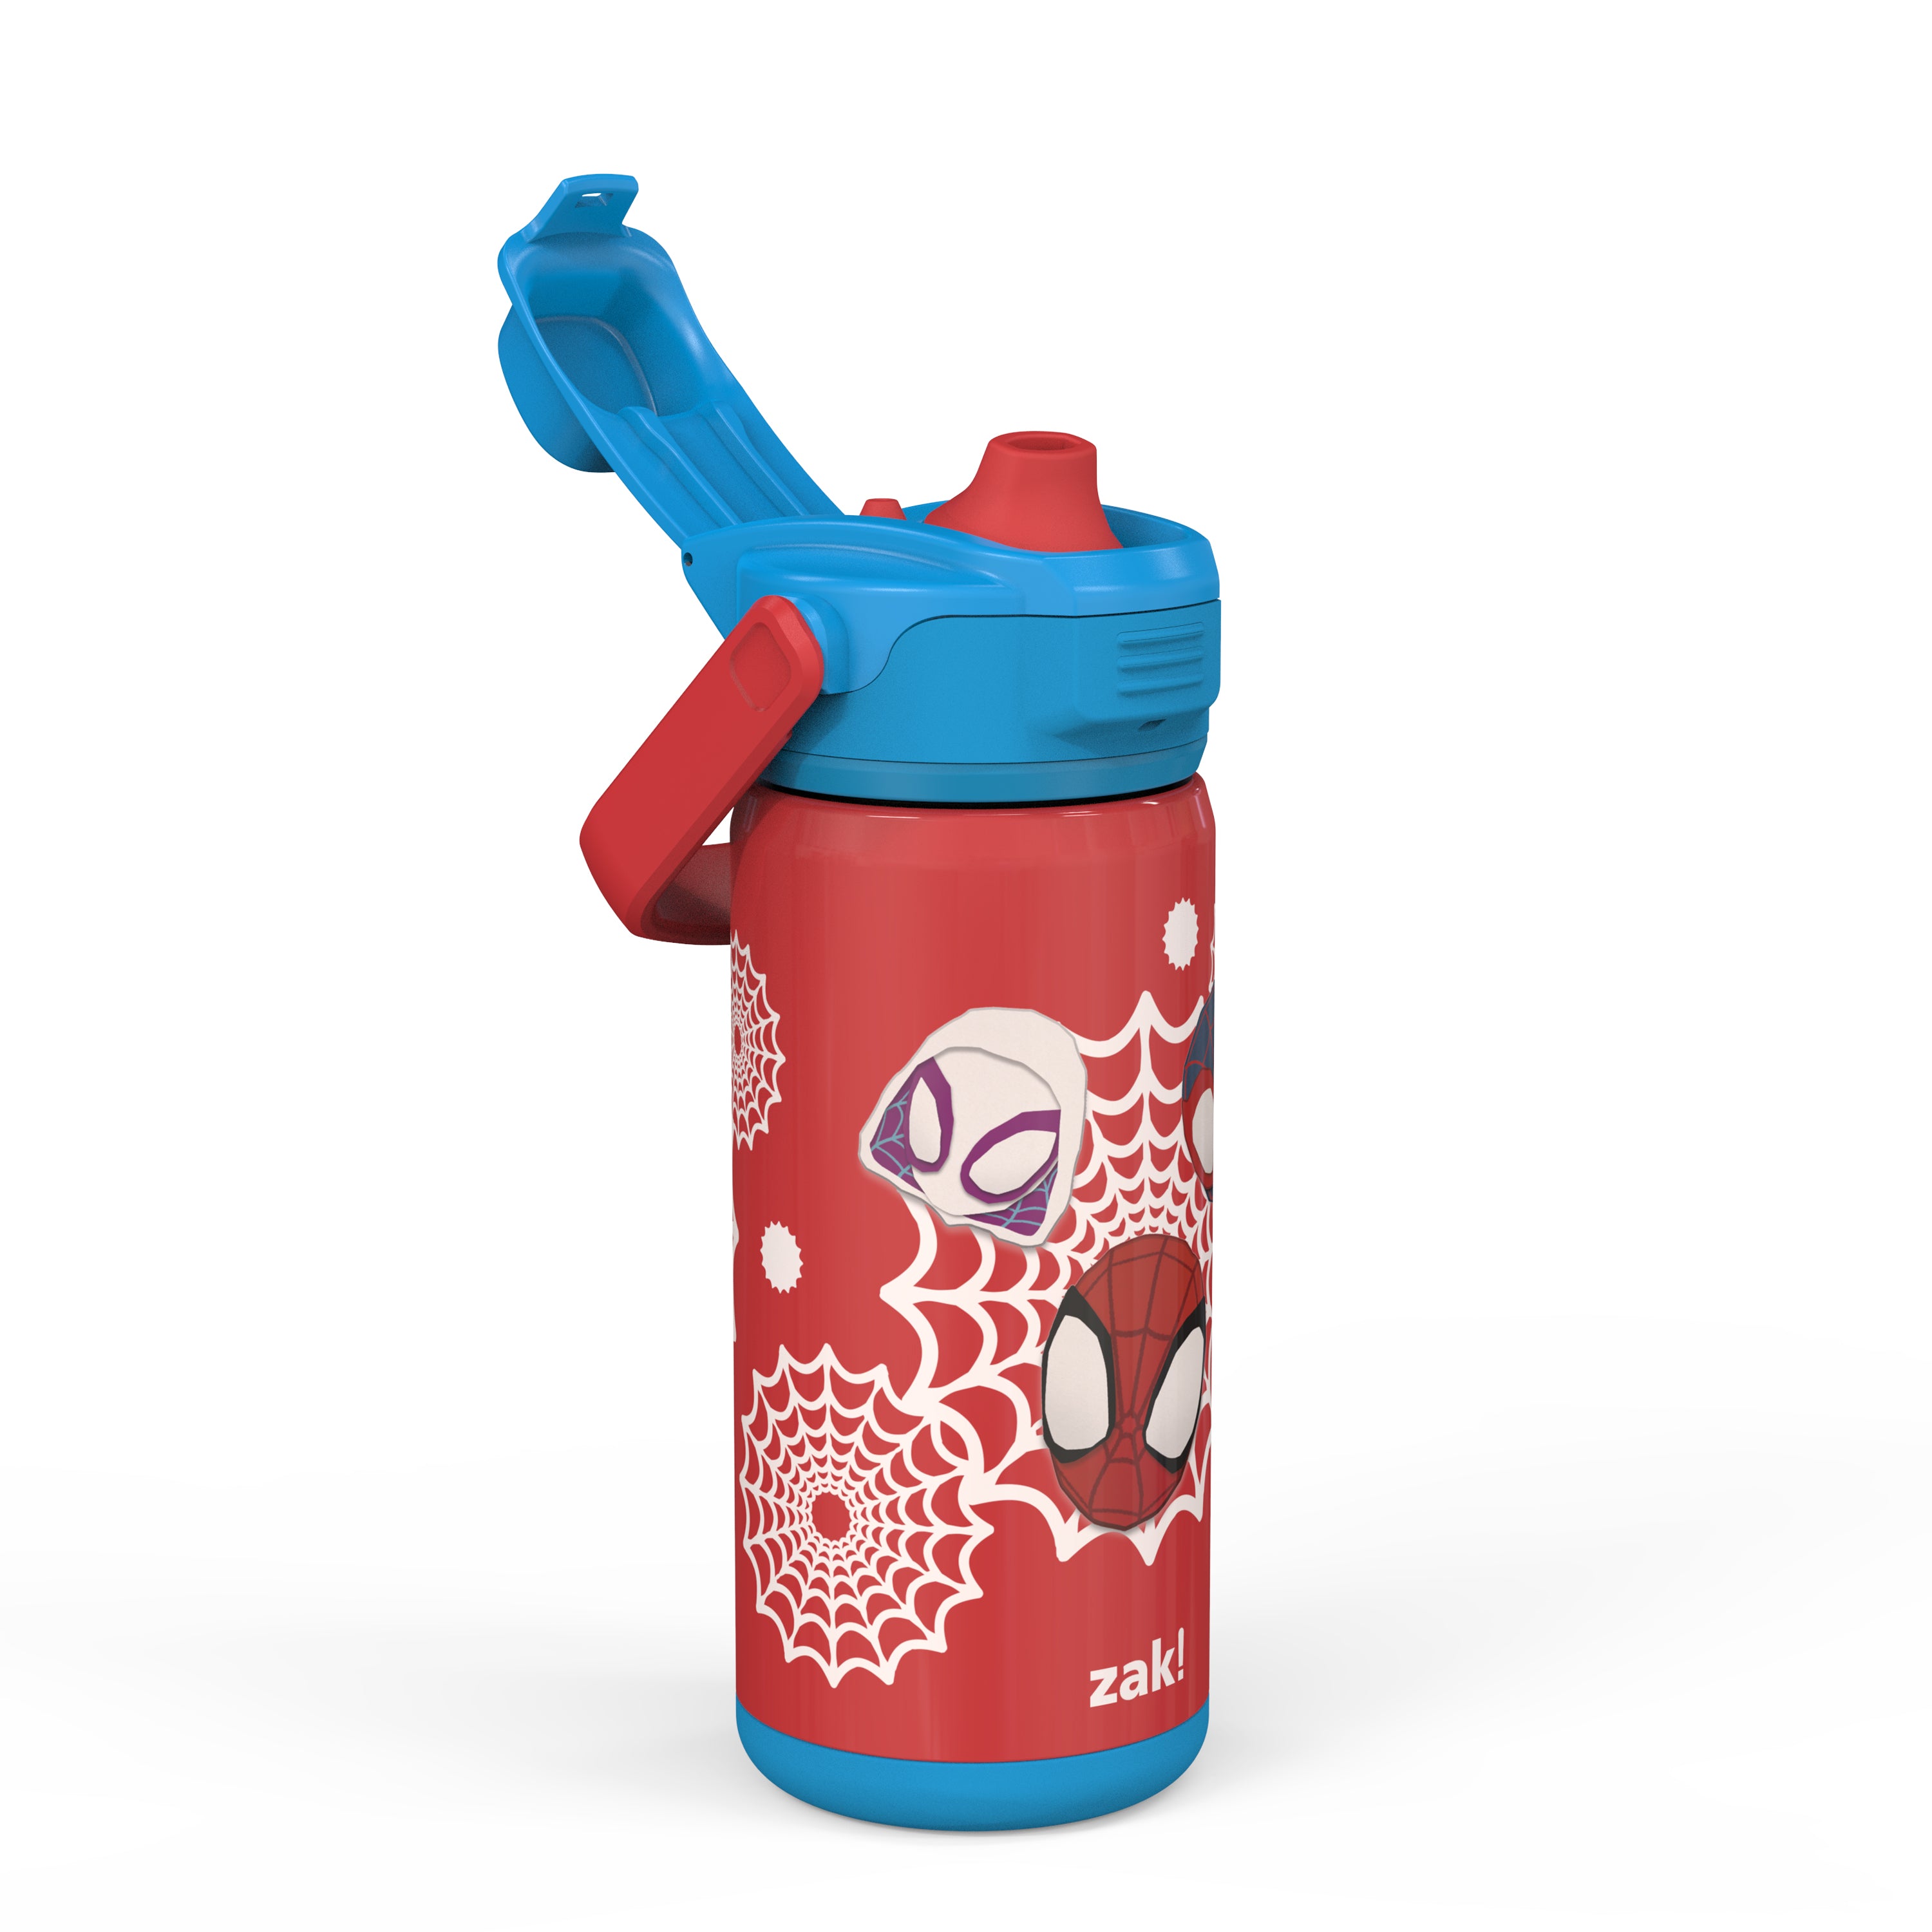 Beacon Stainless Steel Insulated Kids Water Bottle with Covered Spout - Dogs, 14 Ounces